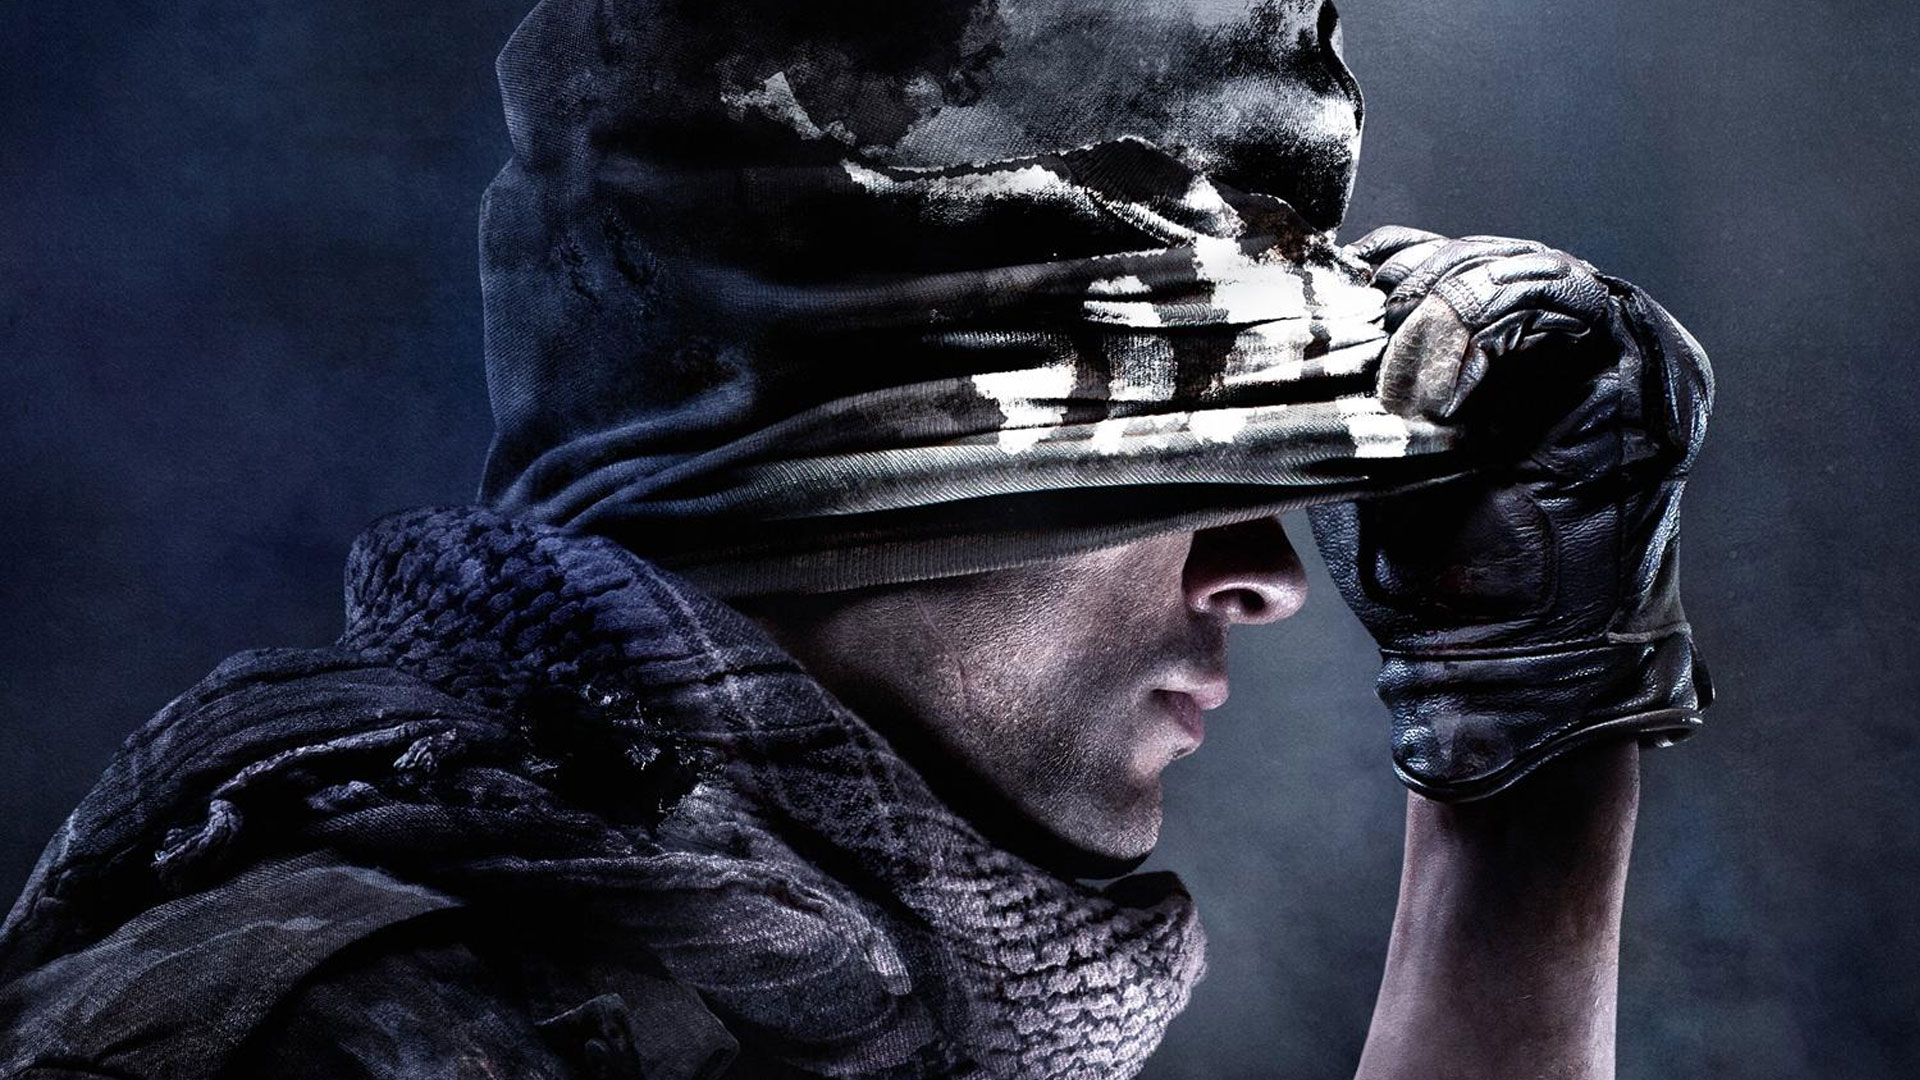 Call of Duty Ghosts Wallpaper in HD Page